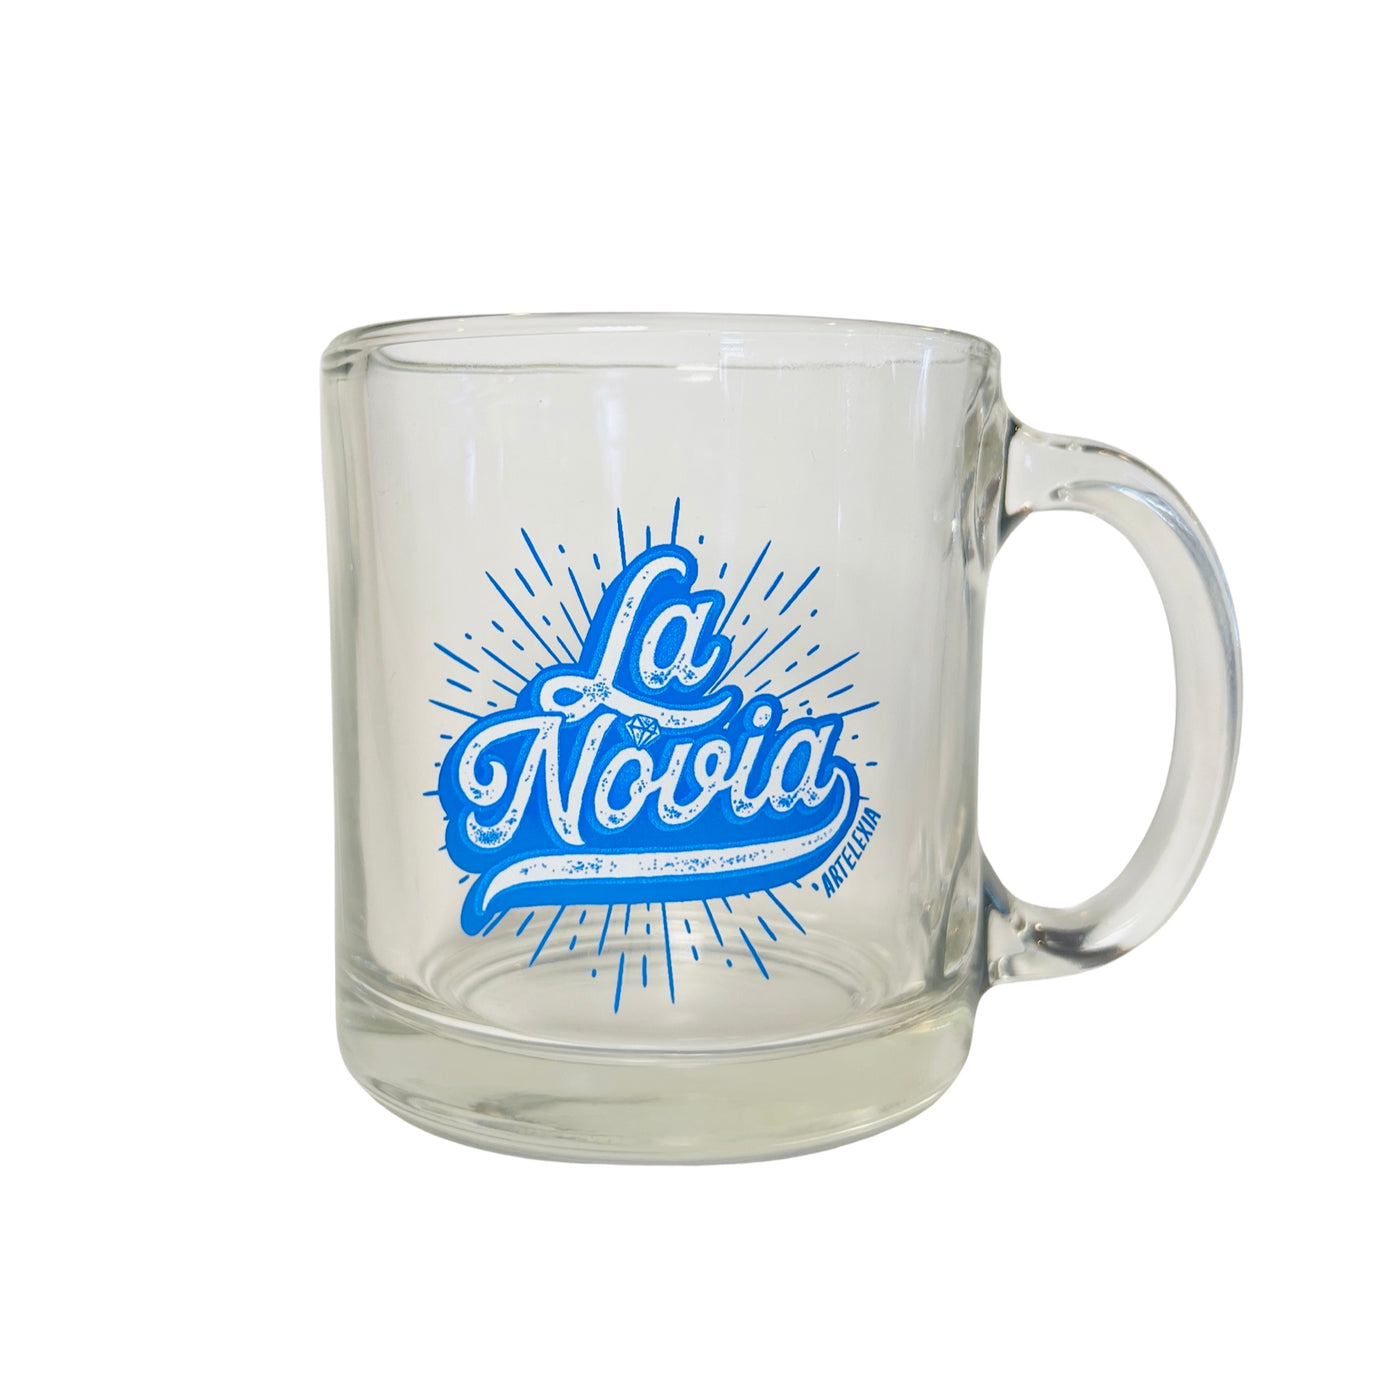 clear glass mug with the phase La Novia in blue lettering